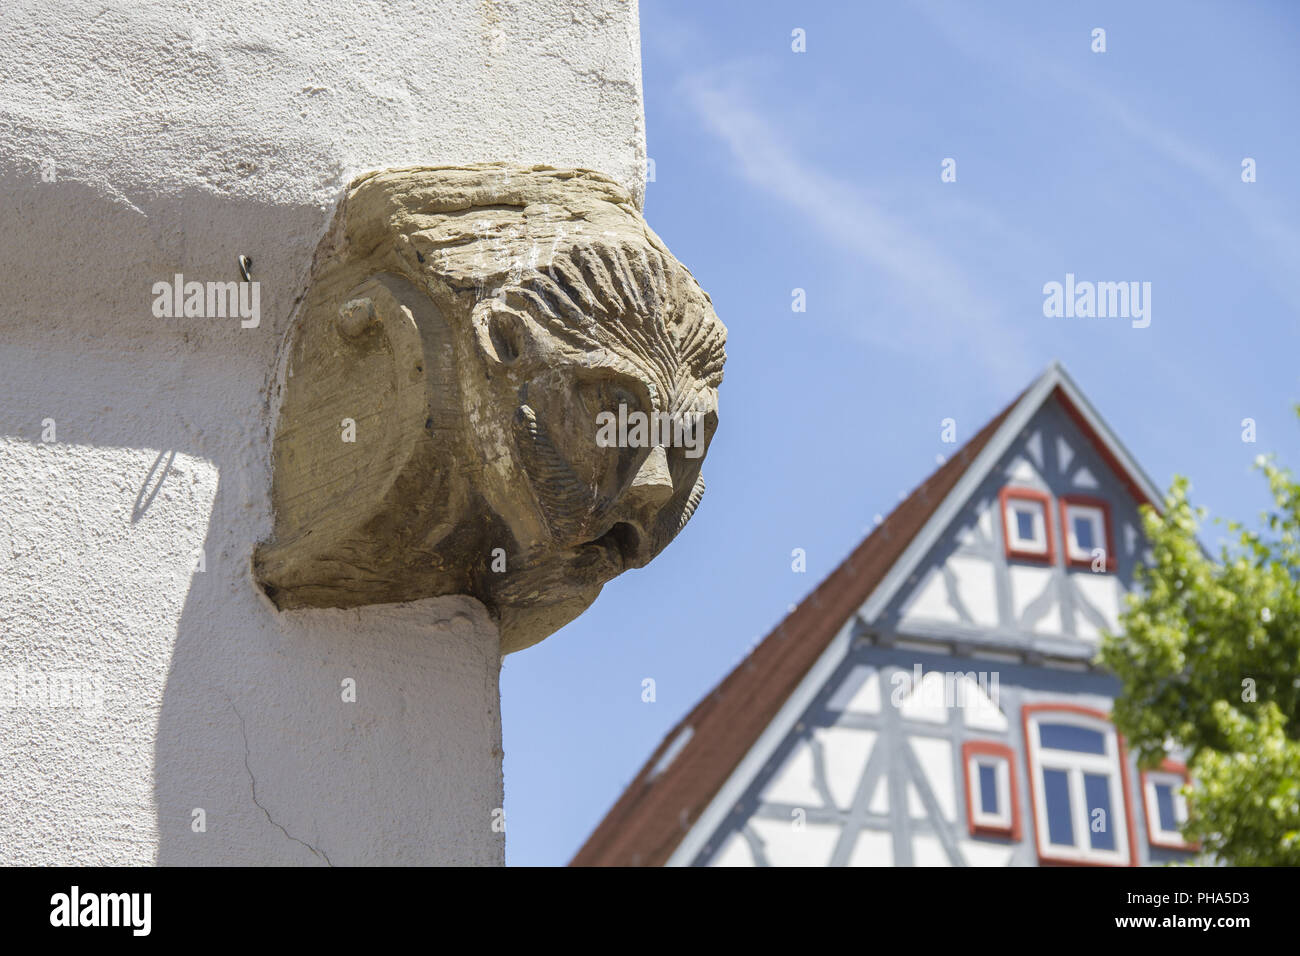 Grotesque figure in the old-town of Waiblingen, Germany Stock Photo